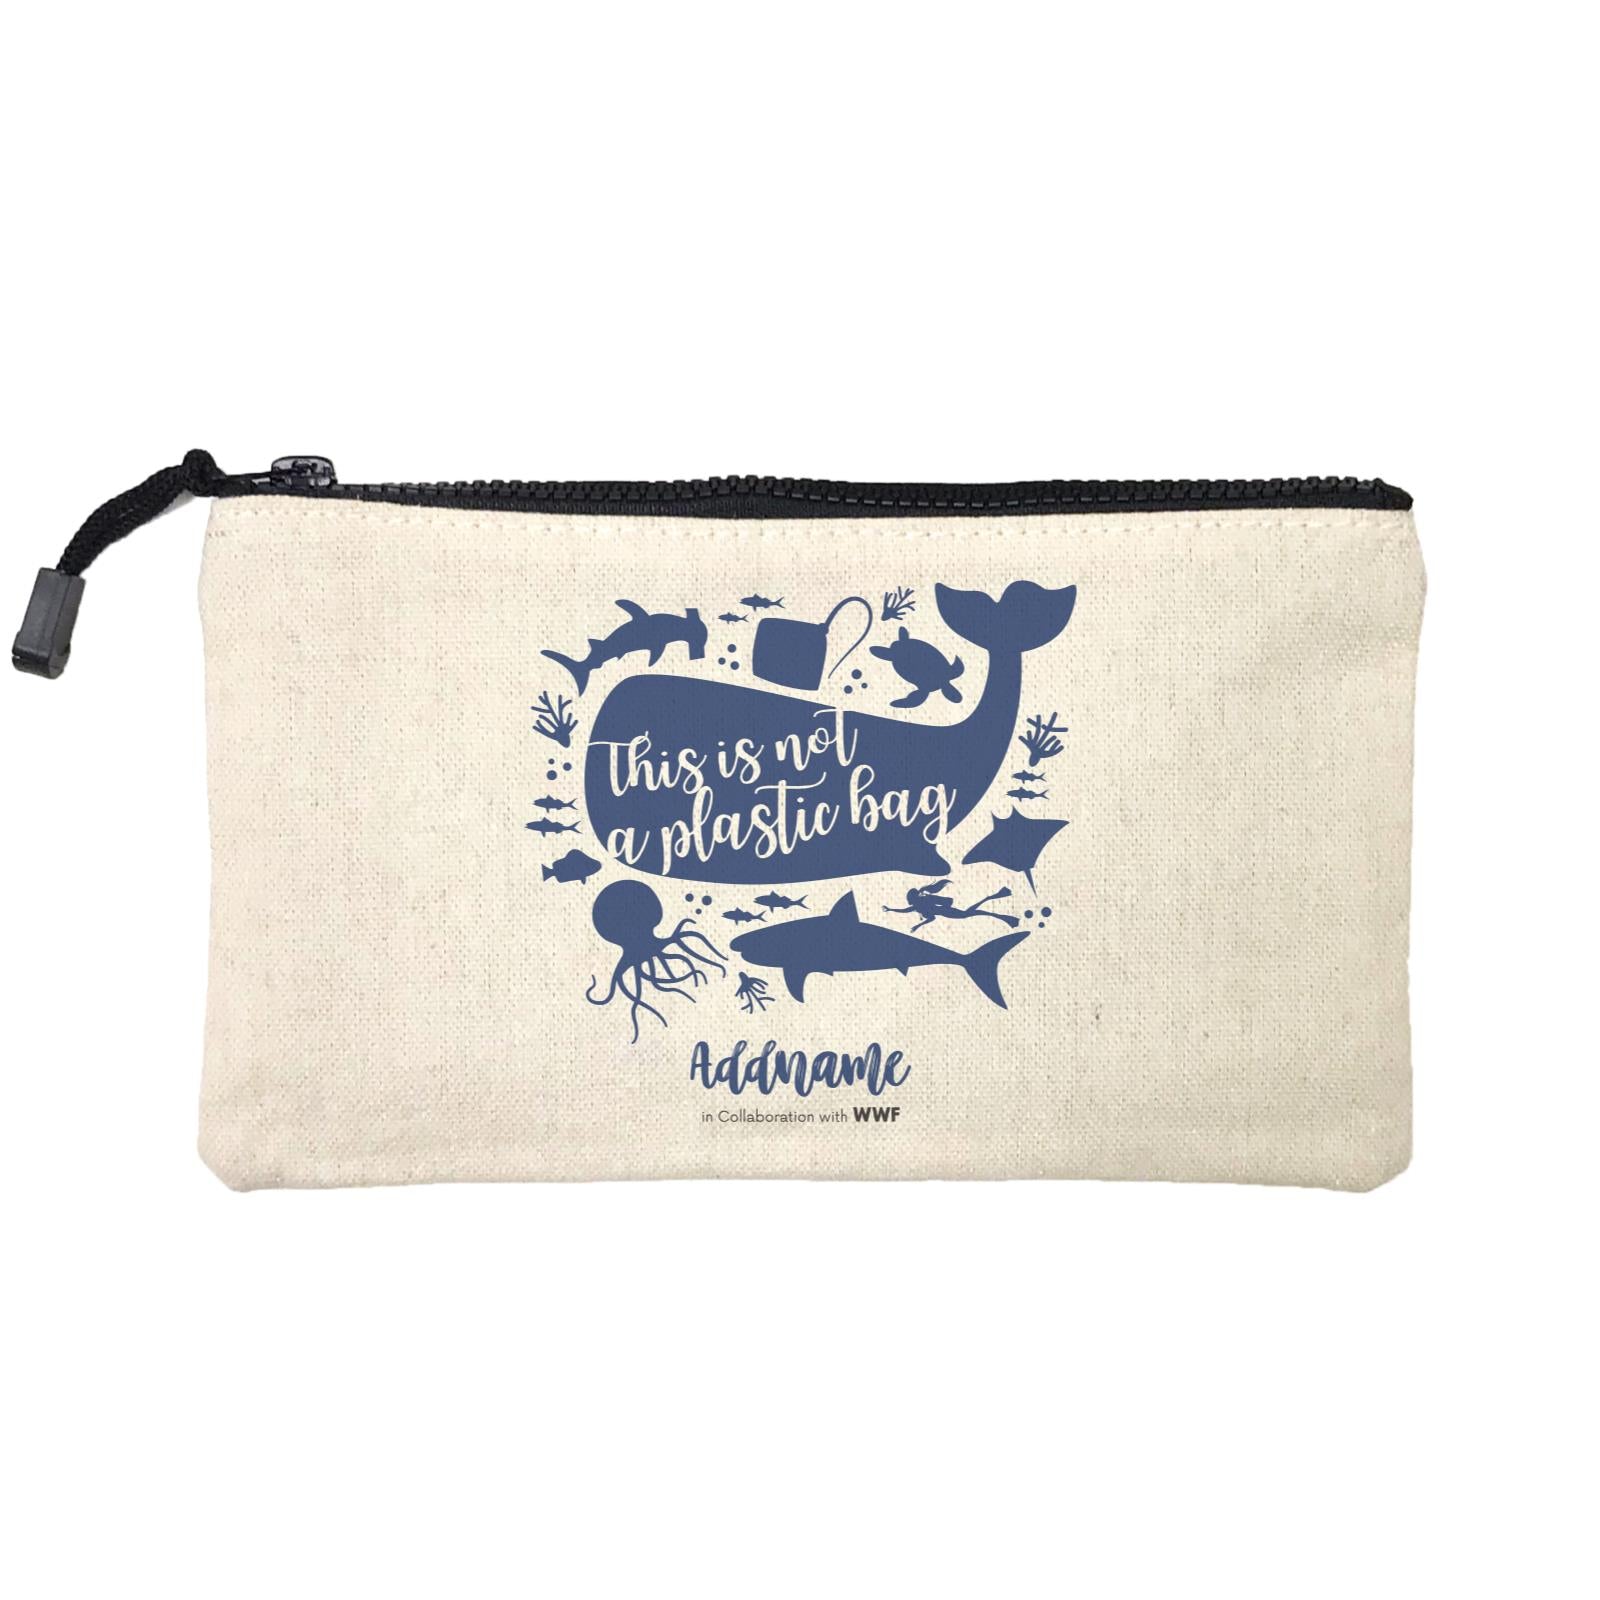 This is Not A Plastic Bag with Sea Animals Silhouette Addname Mini Accessories Stationery Pouch